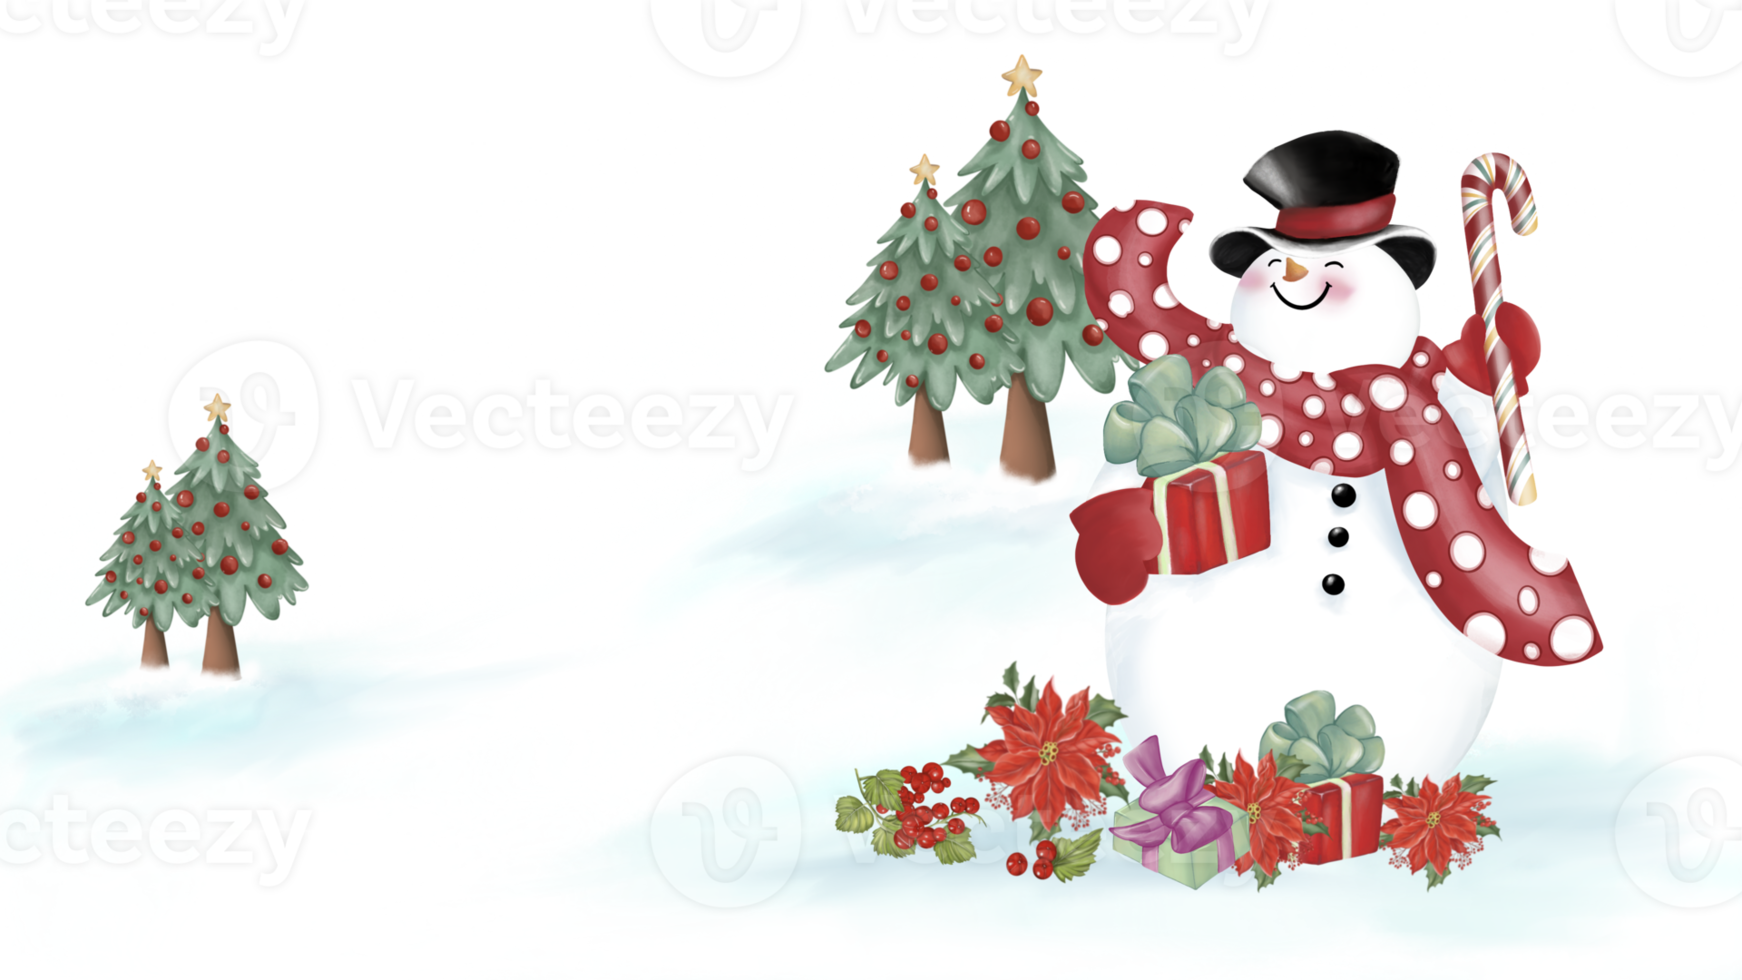 Snowman with a black hat and red scarf with circle pattern is holding gift box and a candy cane. Gift boxes, Christmas flowers and berries on the snow. Christmas Trees at behind. Watercolor  image. png